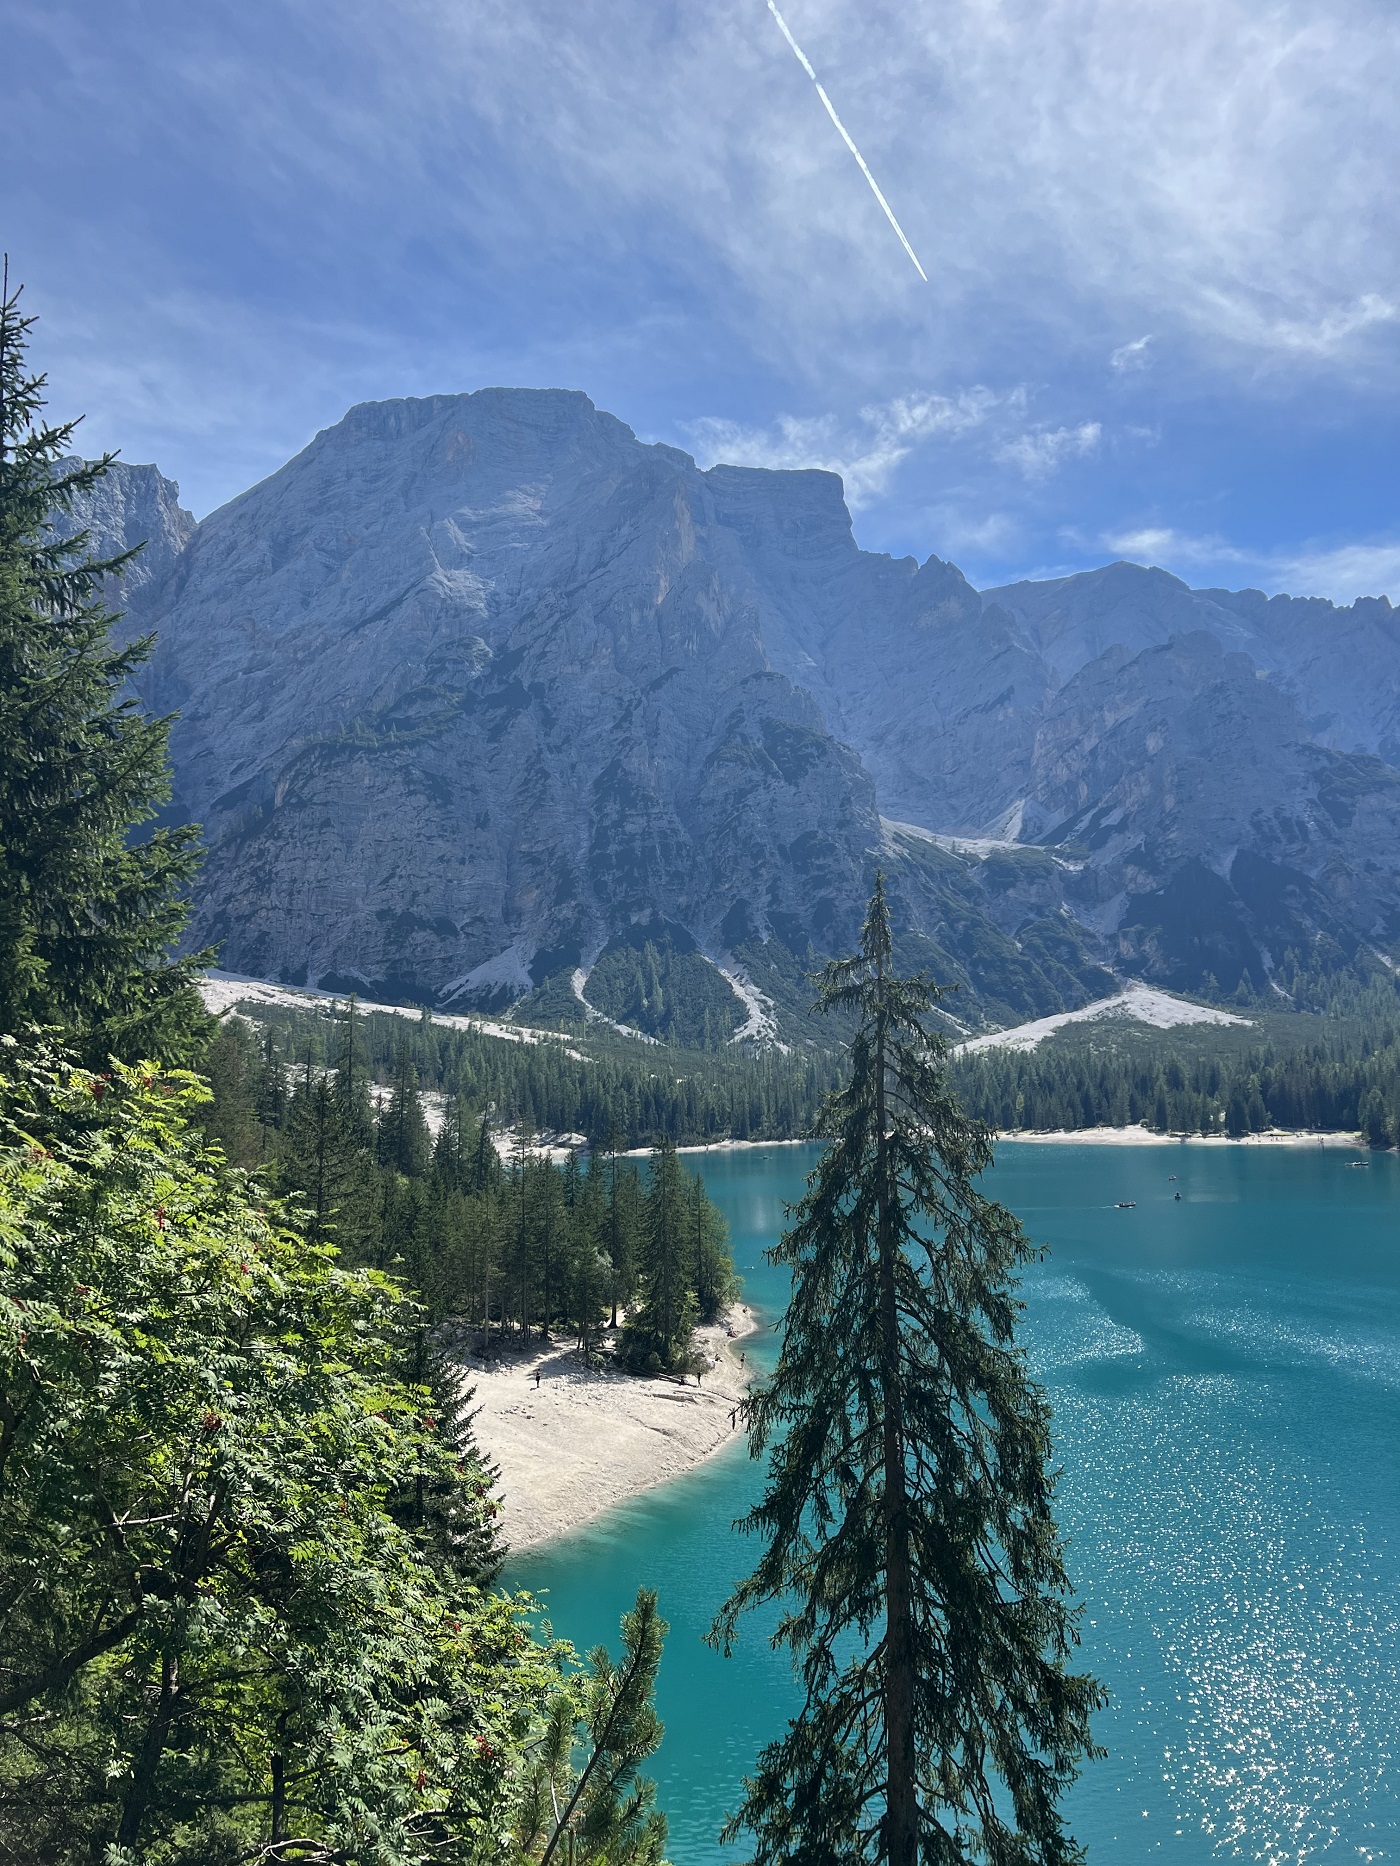 lago di braies, best hikes and things to do near Cortina d'Ampezzo